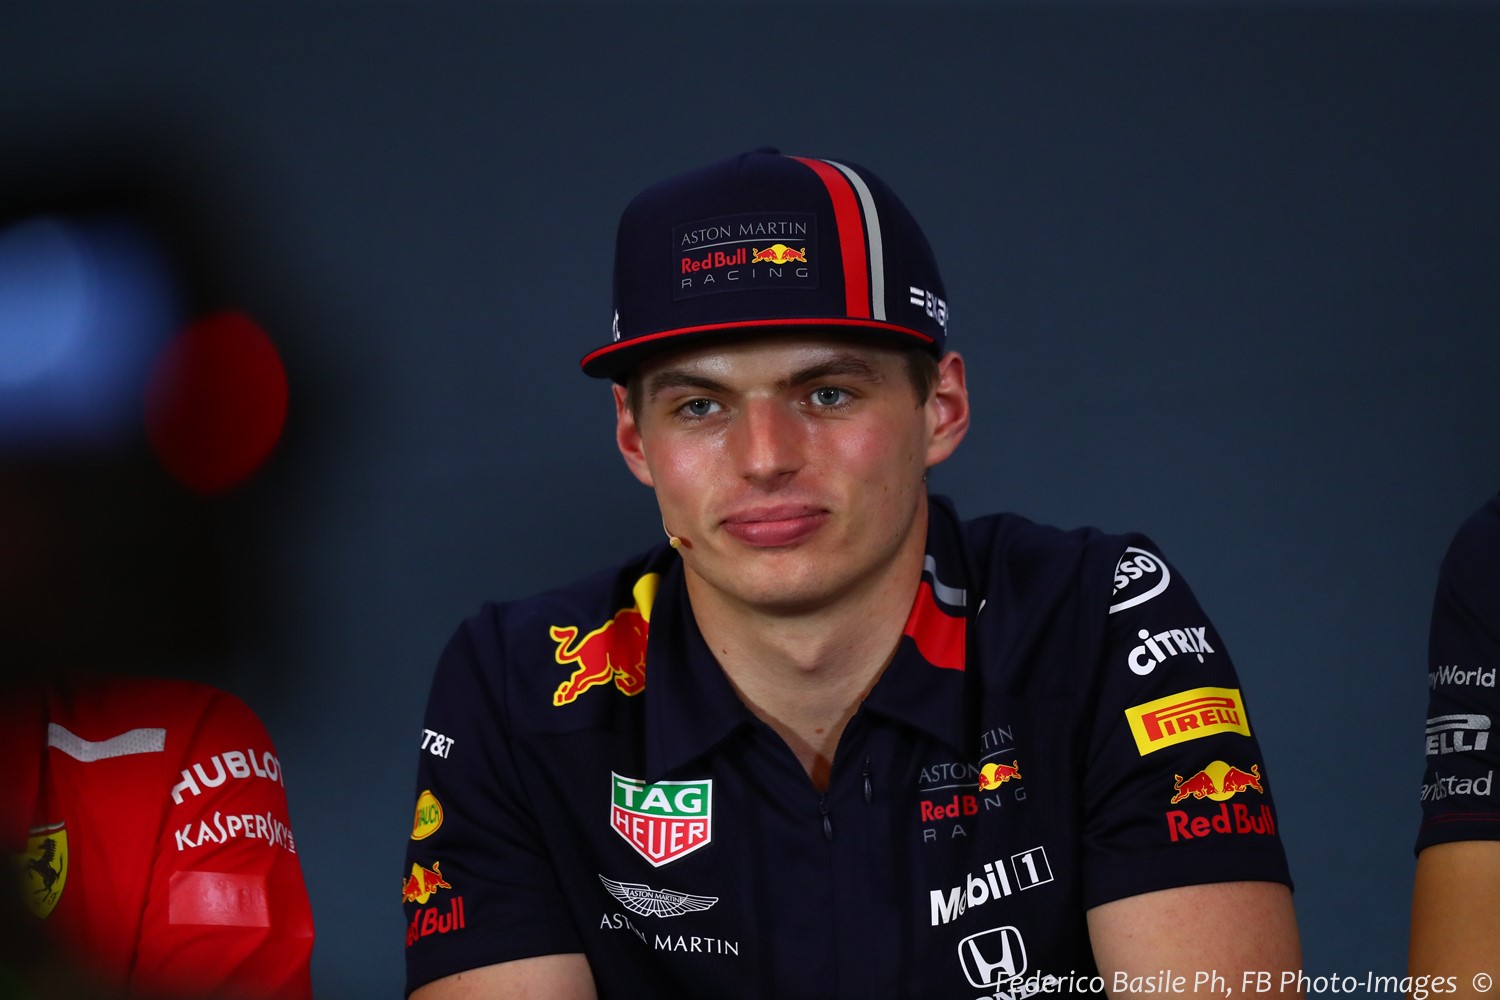 By winning in Austria, Verstappen lost his chance to move to Mercedes